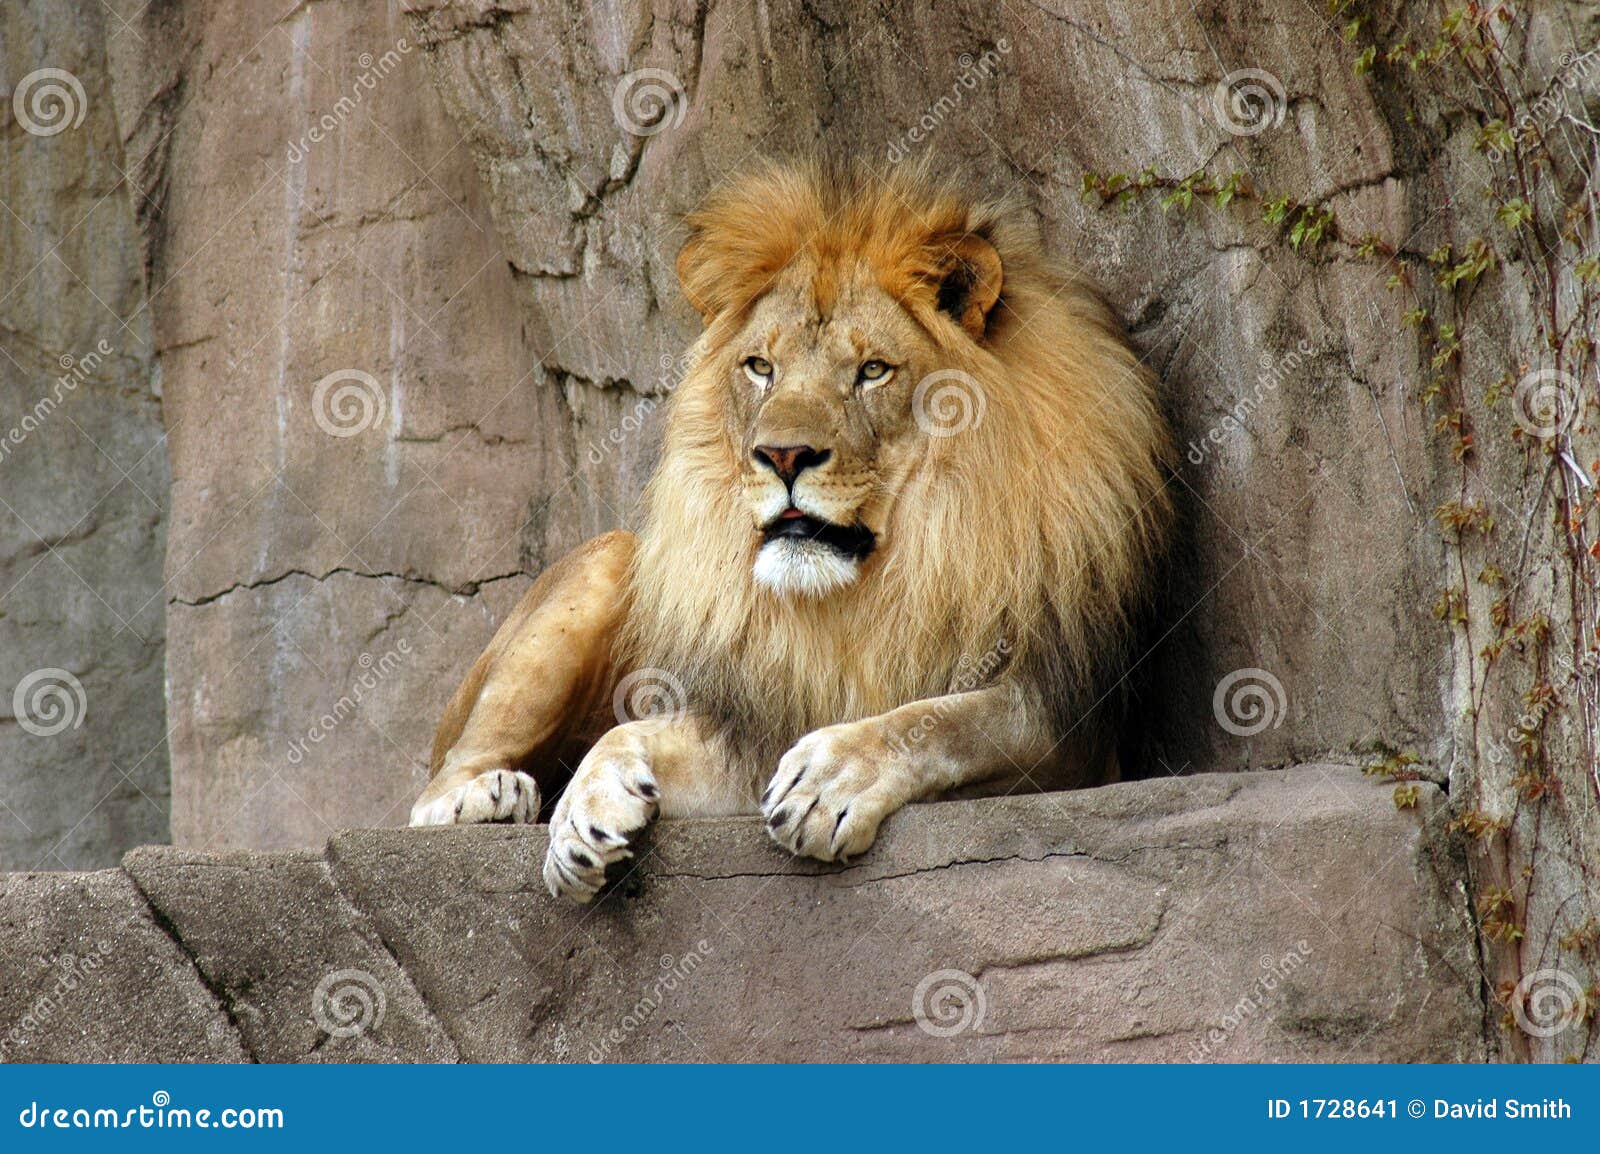 lion resting on a rock ledge at brookfield zoo